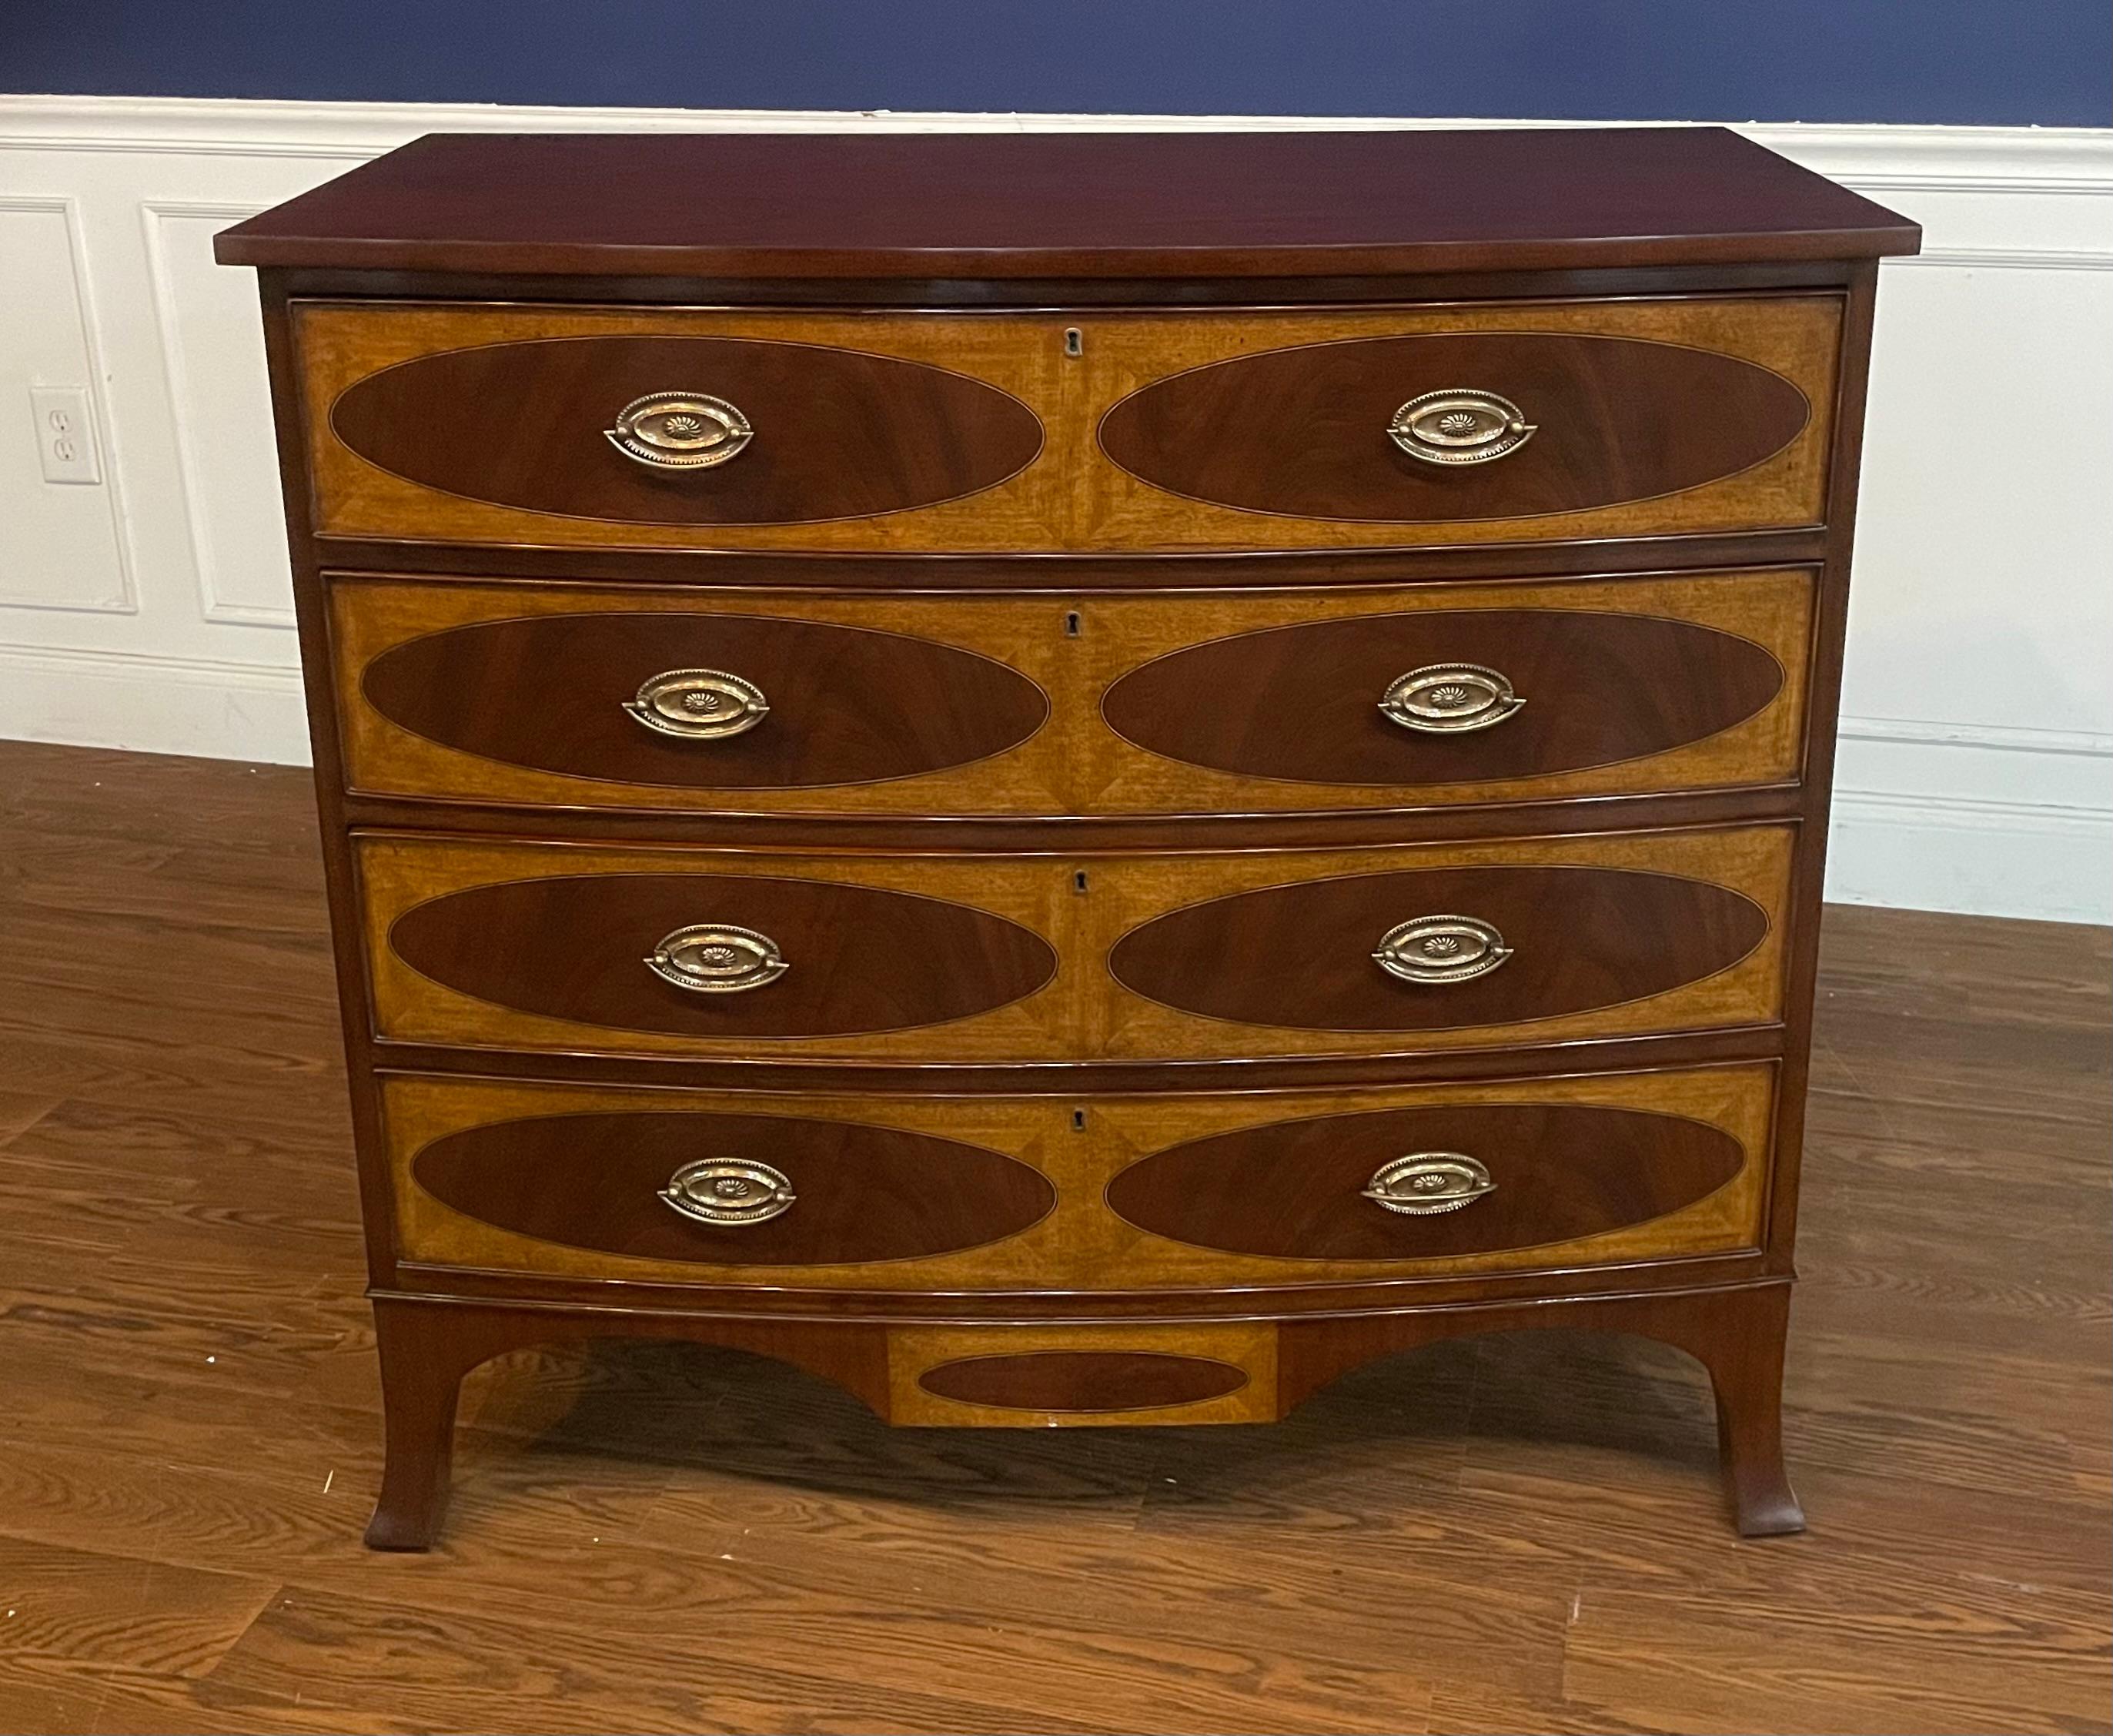 This is a classic inlaid bow front chest by Leighton Hall. Its design was inspired by Adams style chests from the early 1800s. It features four drawers, solid brass hardware and faux key holes. The drawer fronts have swirly crotch mahogany oval